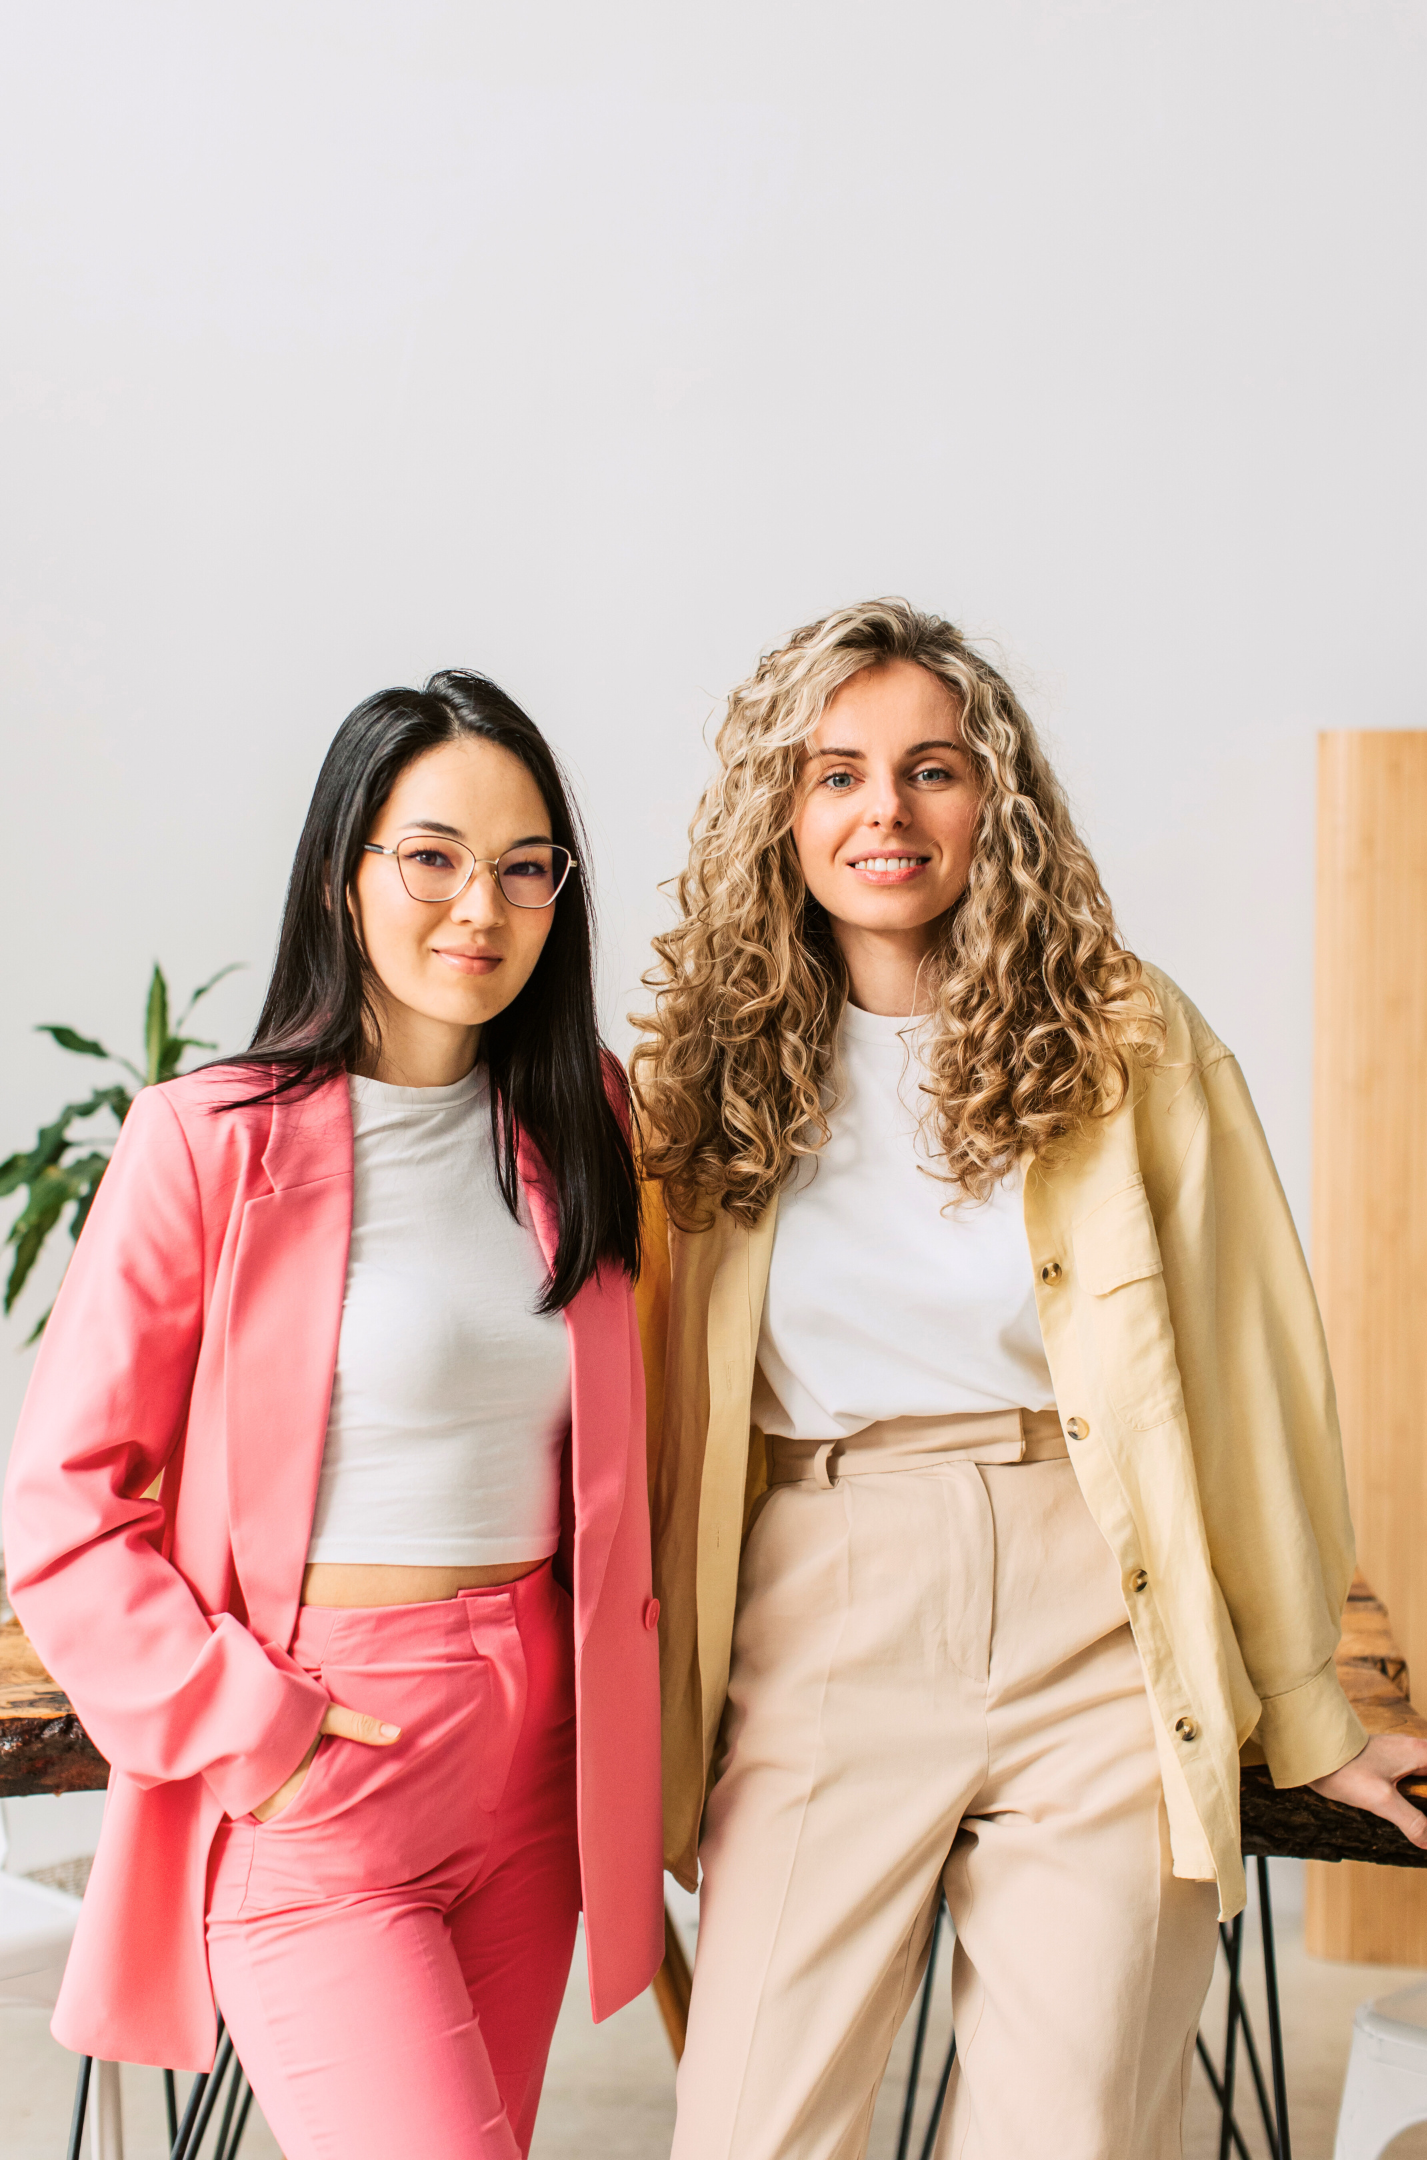 The M.B.A. Executive Coaching Program is for women in the tech industry, women who want to get into the tech industry, or women who work at tech companies